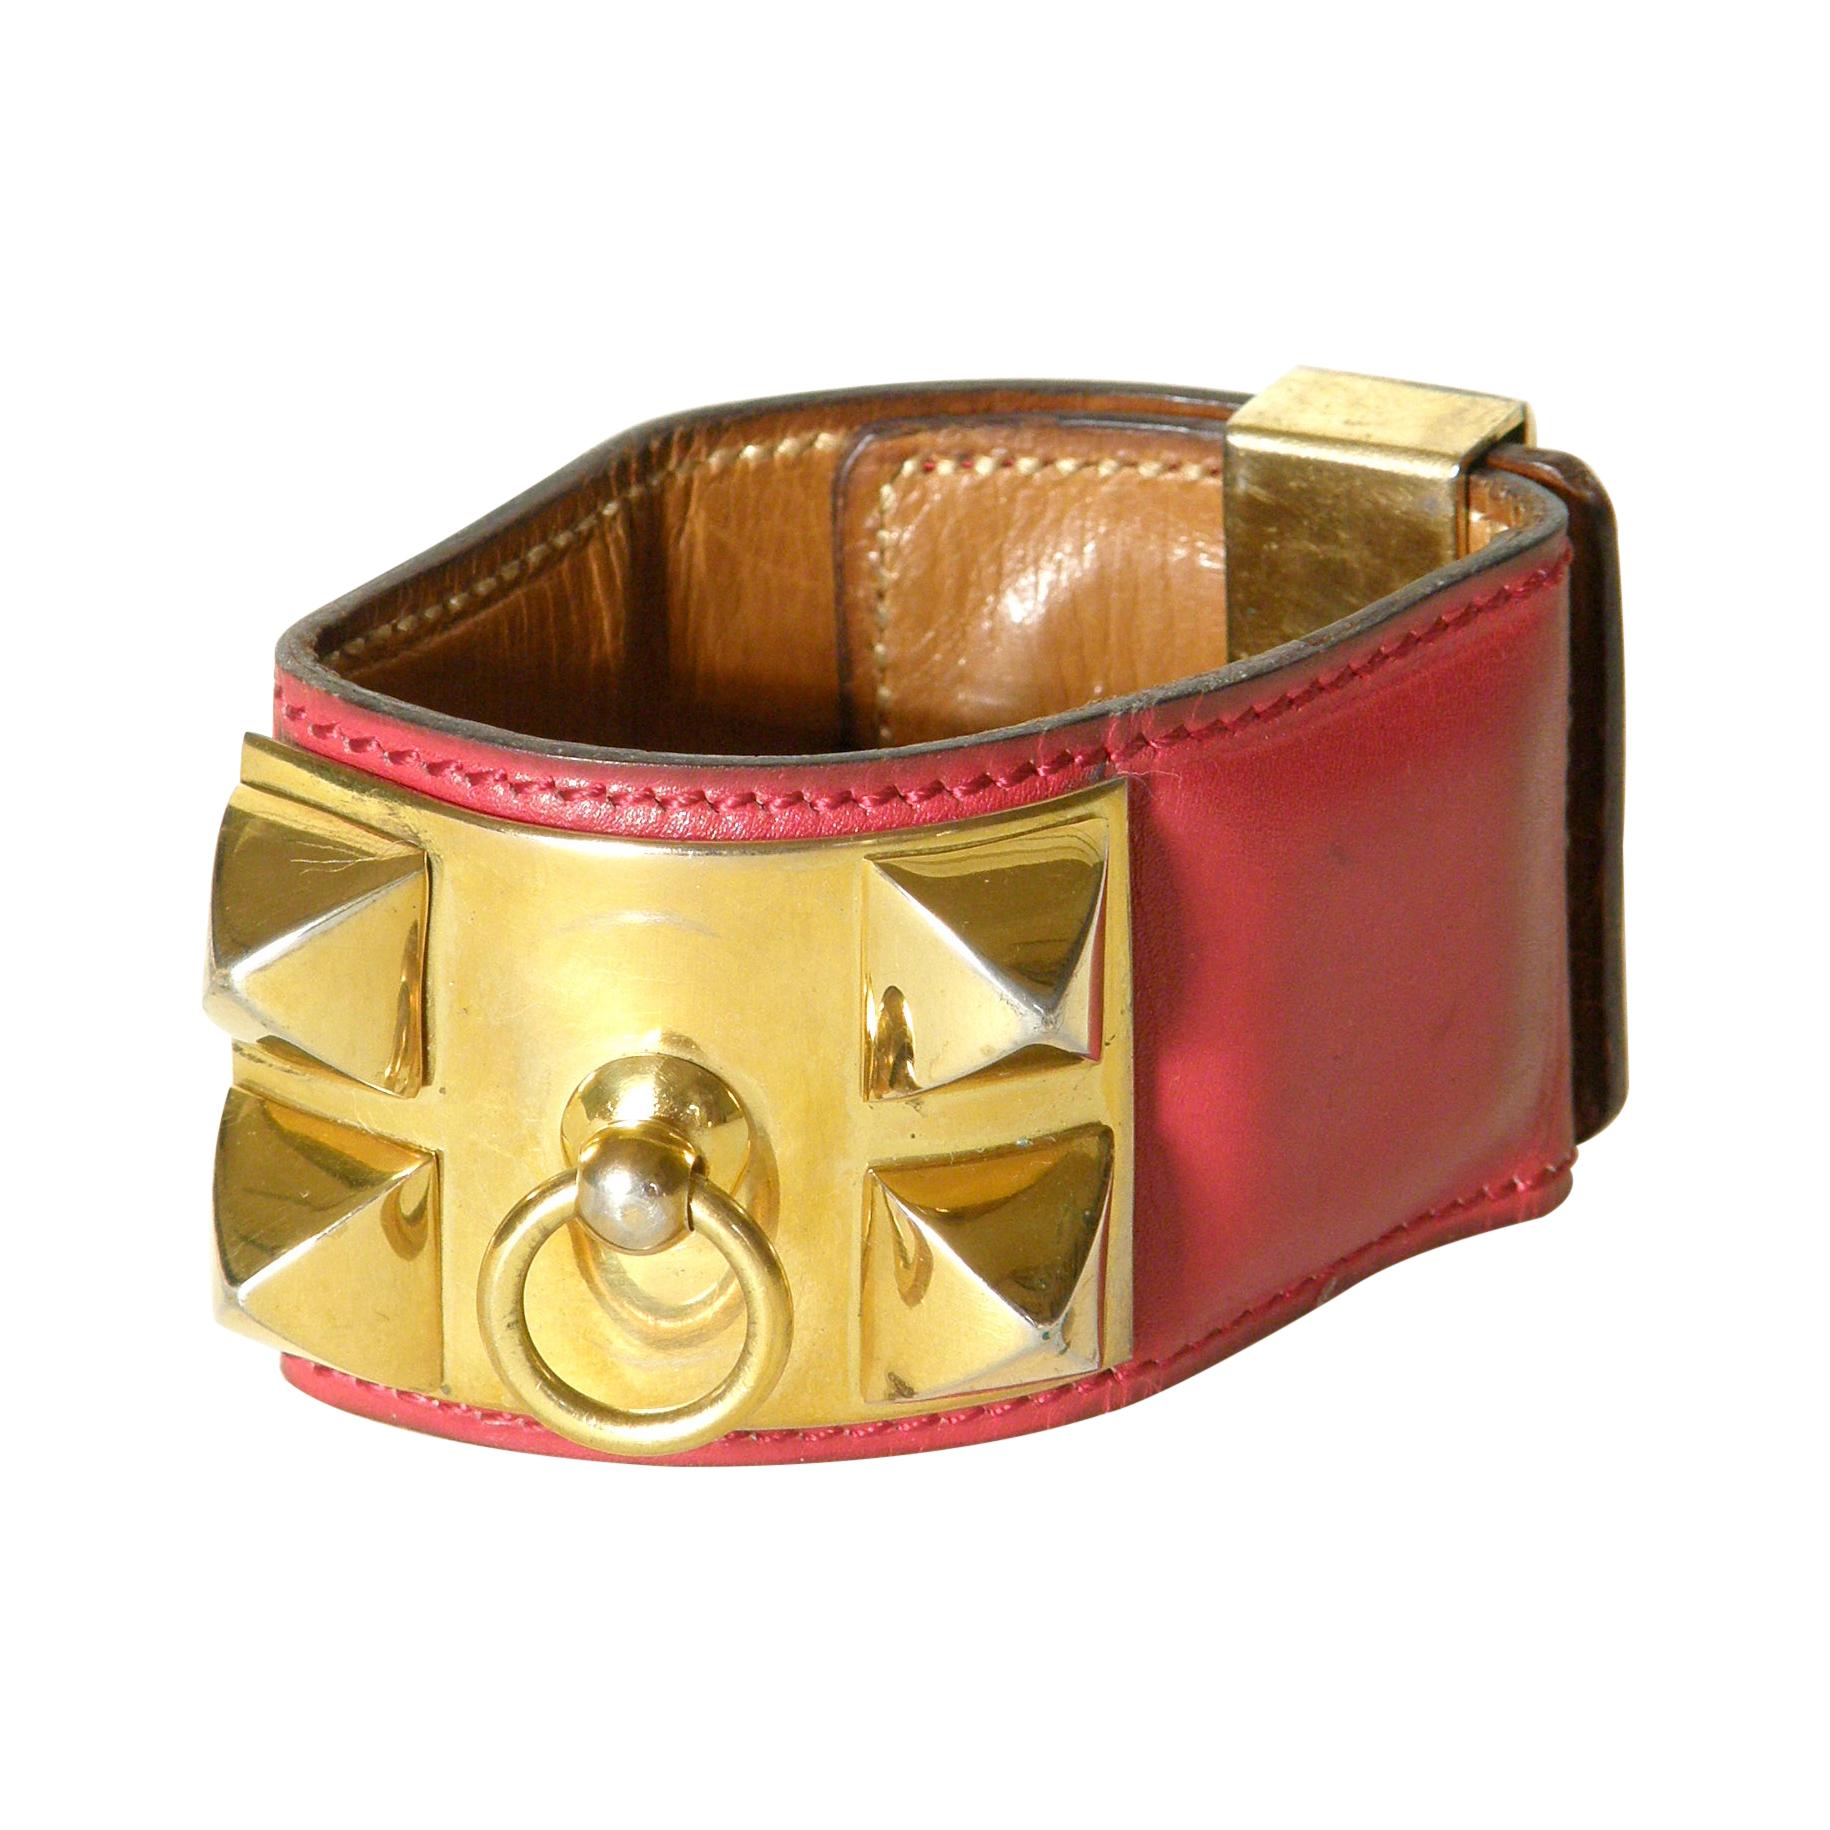 Early Hermès Collier de Chien Cuff Bracelet Red Leather CDC with Gold Hardware For Sale